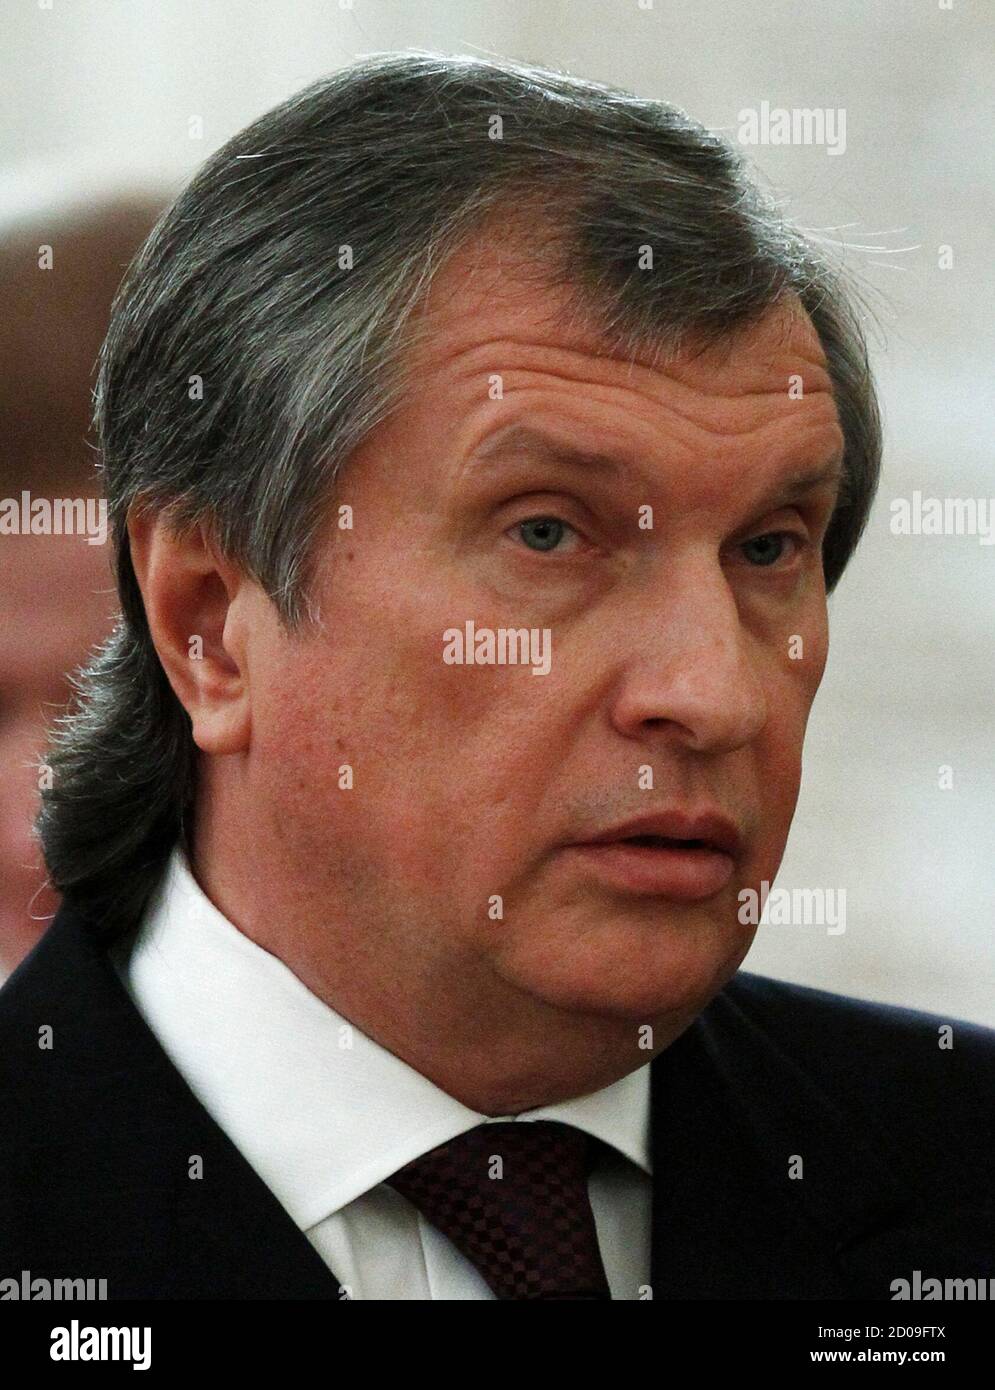 Rosneft President and Chairman of the Management Board Igor Sechin attends a meeting of Russia's President Vladimir Putin and his Chinese counterpart Xi Jinping at the Kremlin in Moscow March 22, 2013. Shares in TNK-BP Holding, the traded unit of TNK-BP oil producer, fell more than 14 percent to reach its historic low on Friday after Igor Sechin, the head of Rosneft, reiterated that Rosneft will not buy out TNK-BP shares. REUTERS/Sergei Karpukhin (RUSSIA - Tags: POLITICS BUSINESS ENERGY HEADSHOT) Stock Photo